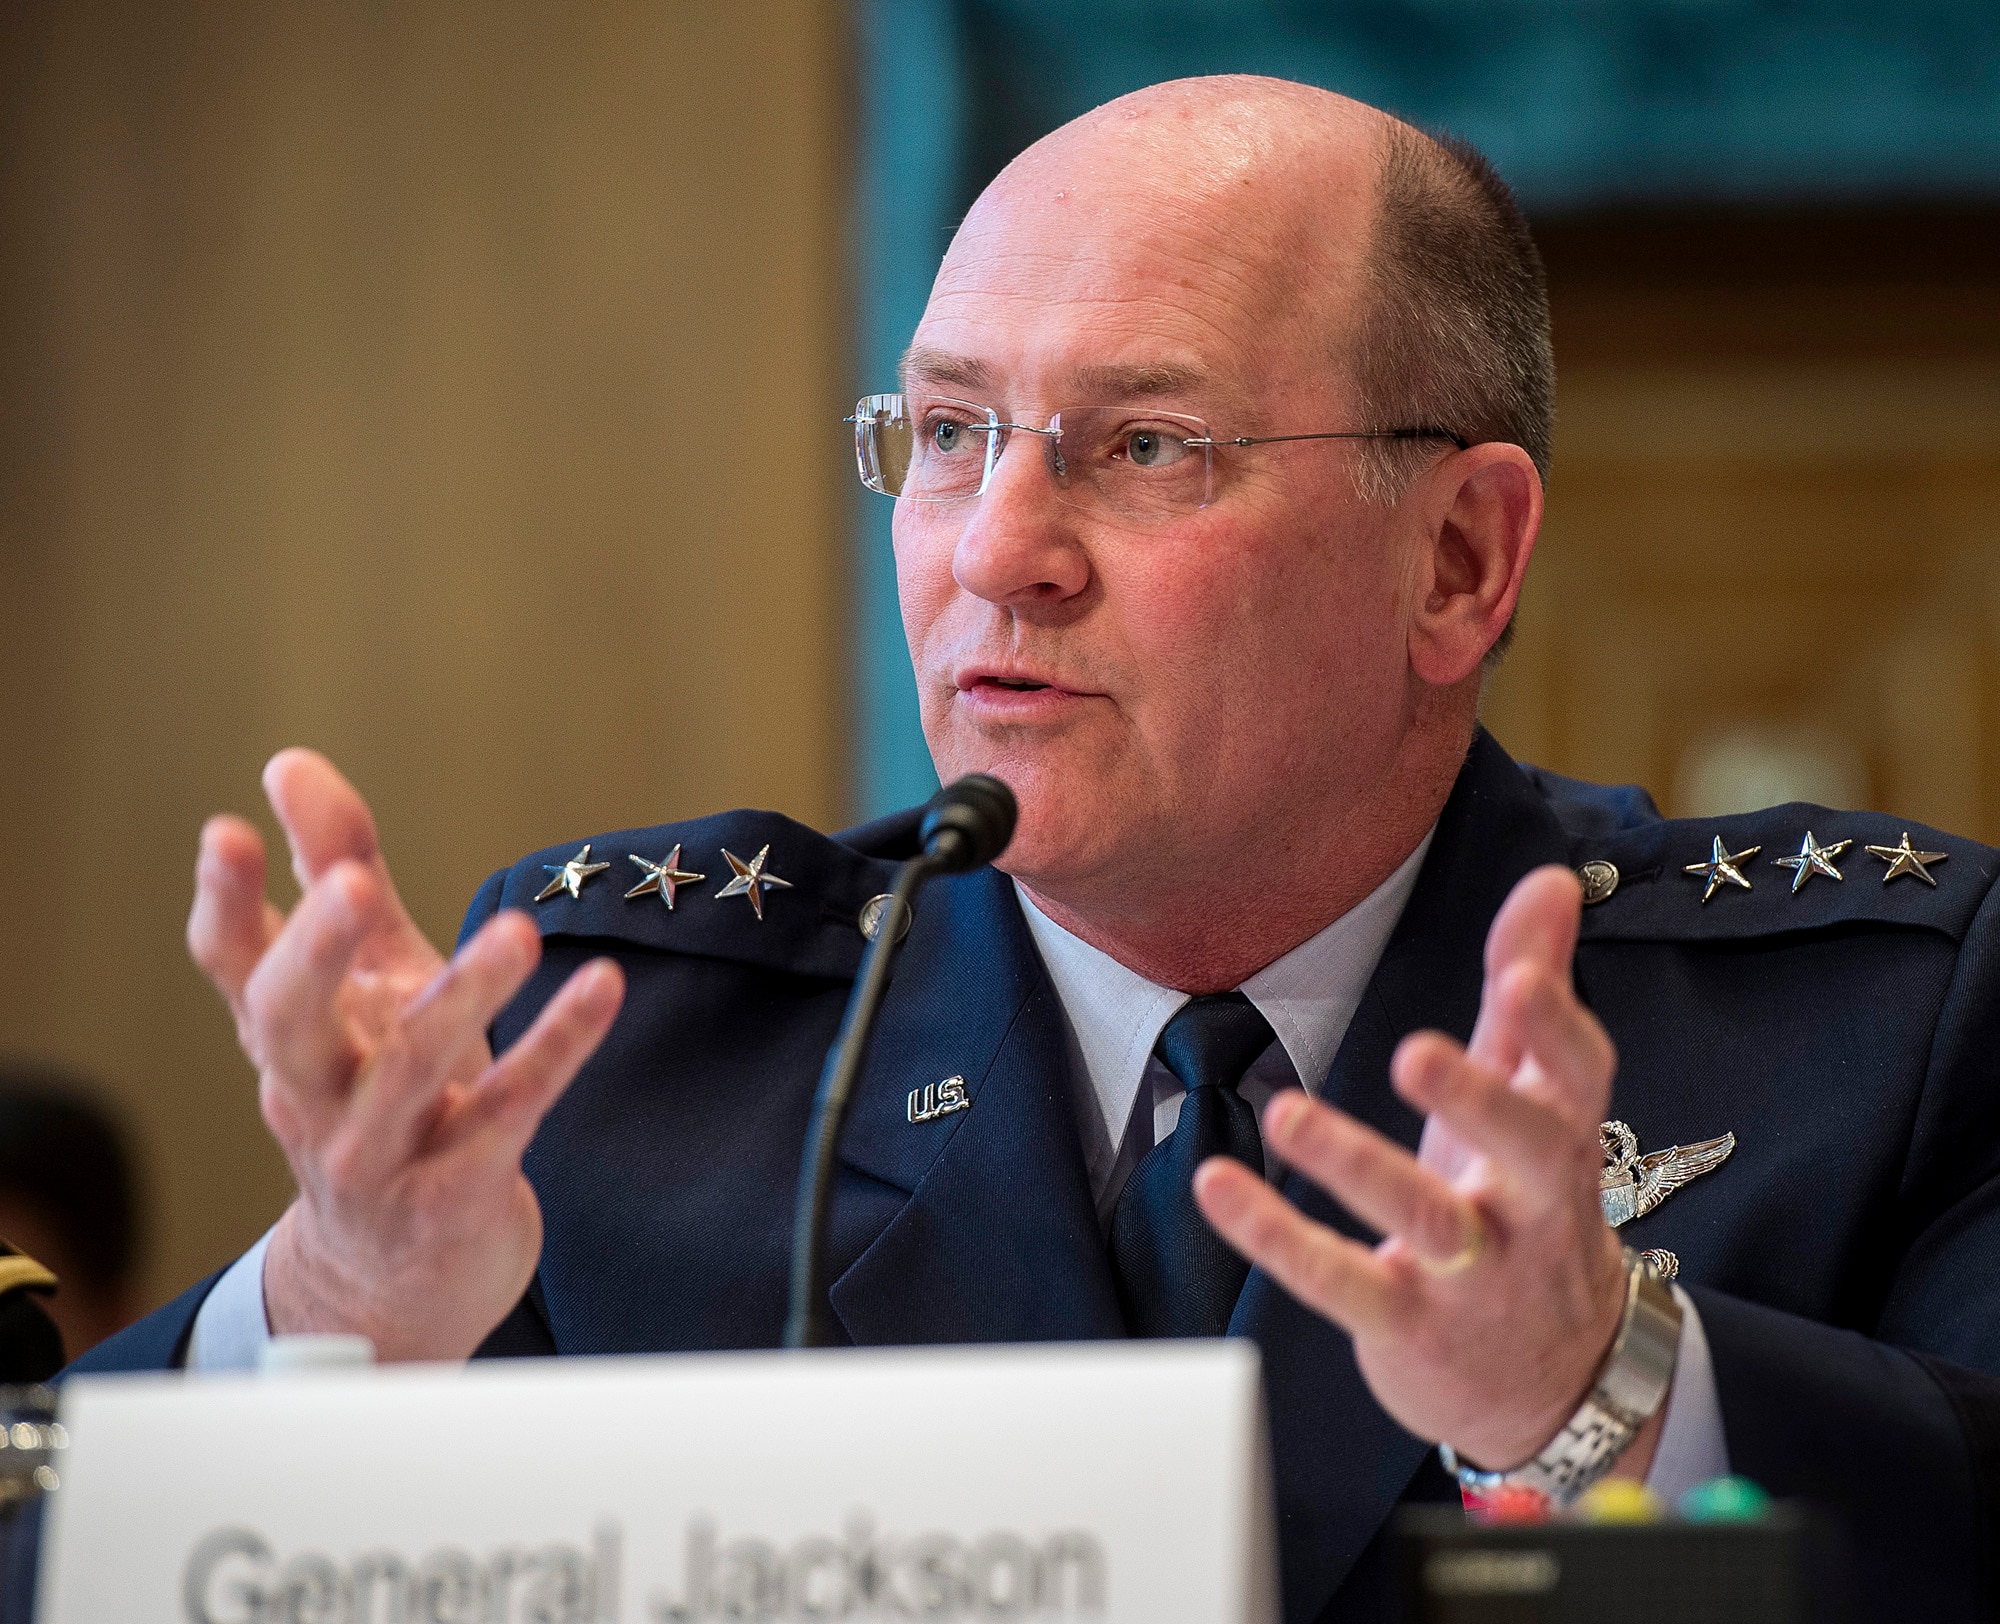 Air Force Reserve Chief Lt. Gen. James Jackson testifies before the Senate Appropriations Committee Subcommittee on Defense, to answer questions pertaining to the fiscal year 2016 funding request and budget justification for the U.S. National Guard and Reserve, in Washington, D.C., April 29, 2015.  Testifying with Jackson, on behalf of the Air National Guard, was director of the Air National Guard Lt. Gen. Stanley E. Clark III.  (U.S. Air Force photo/Jim Varhegyi)